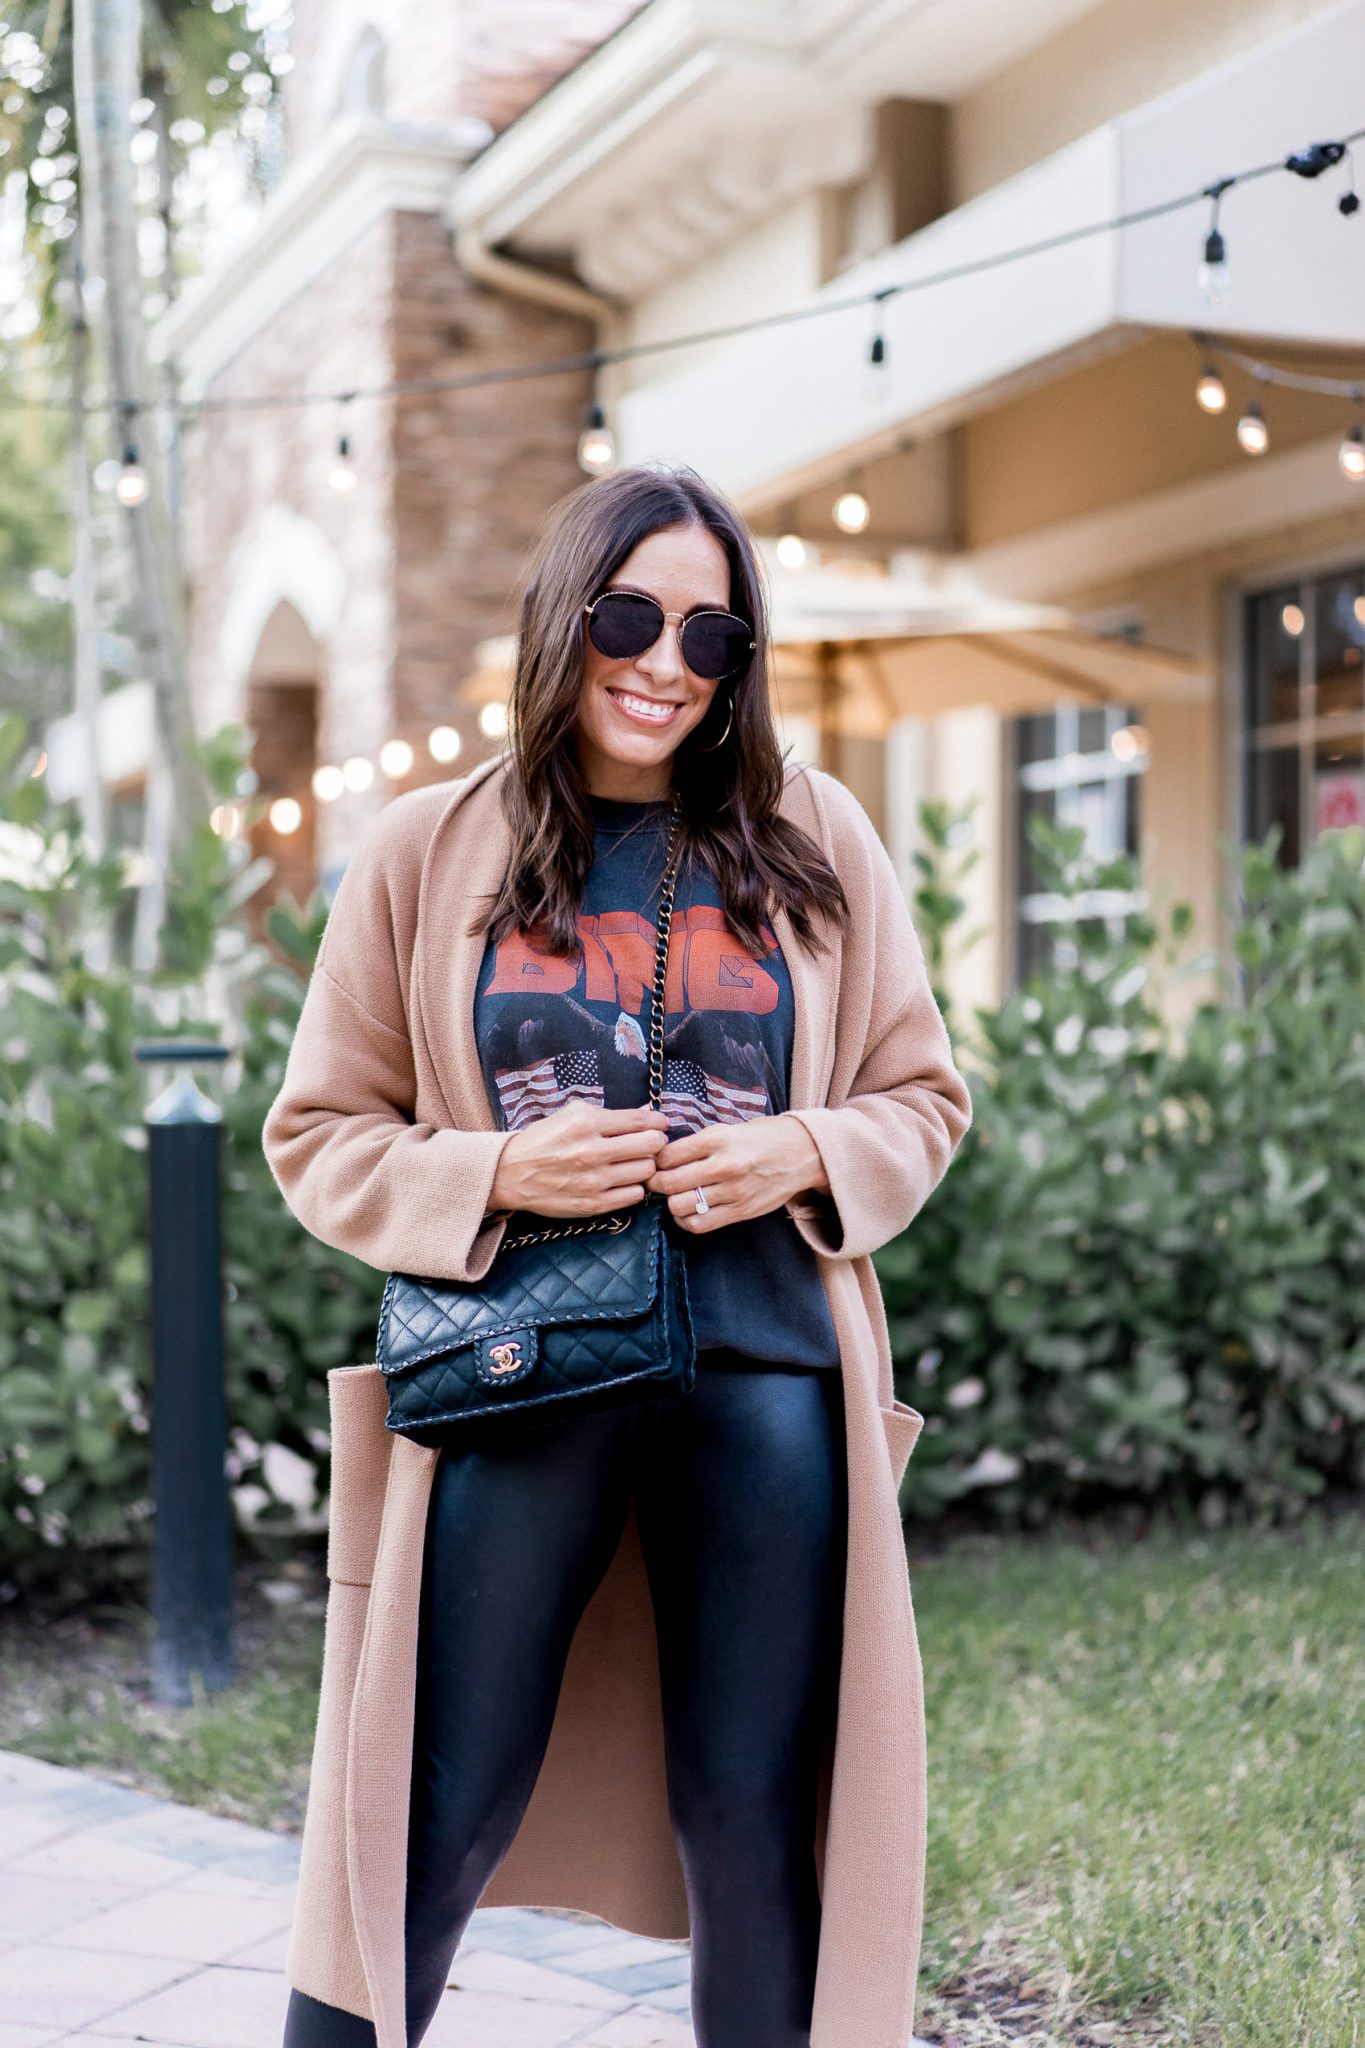 Top Florida fashion blogger Amanda of A Glam Lifestyle wears an Anine Bing sweatshirt paired with Commando faux leather leggings for an easy fall outfit